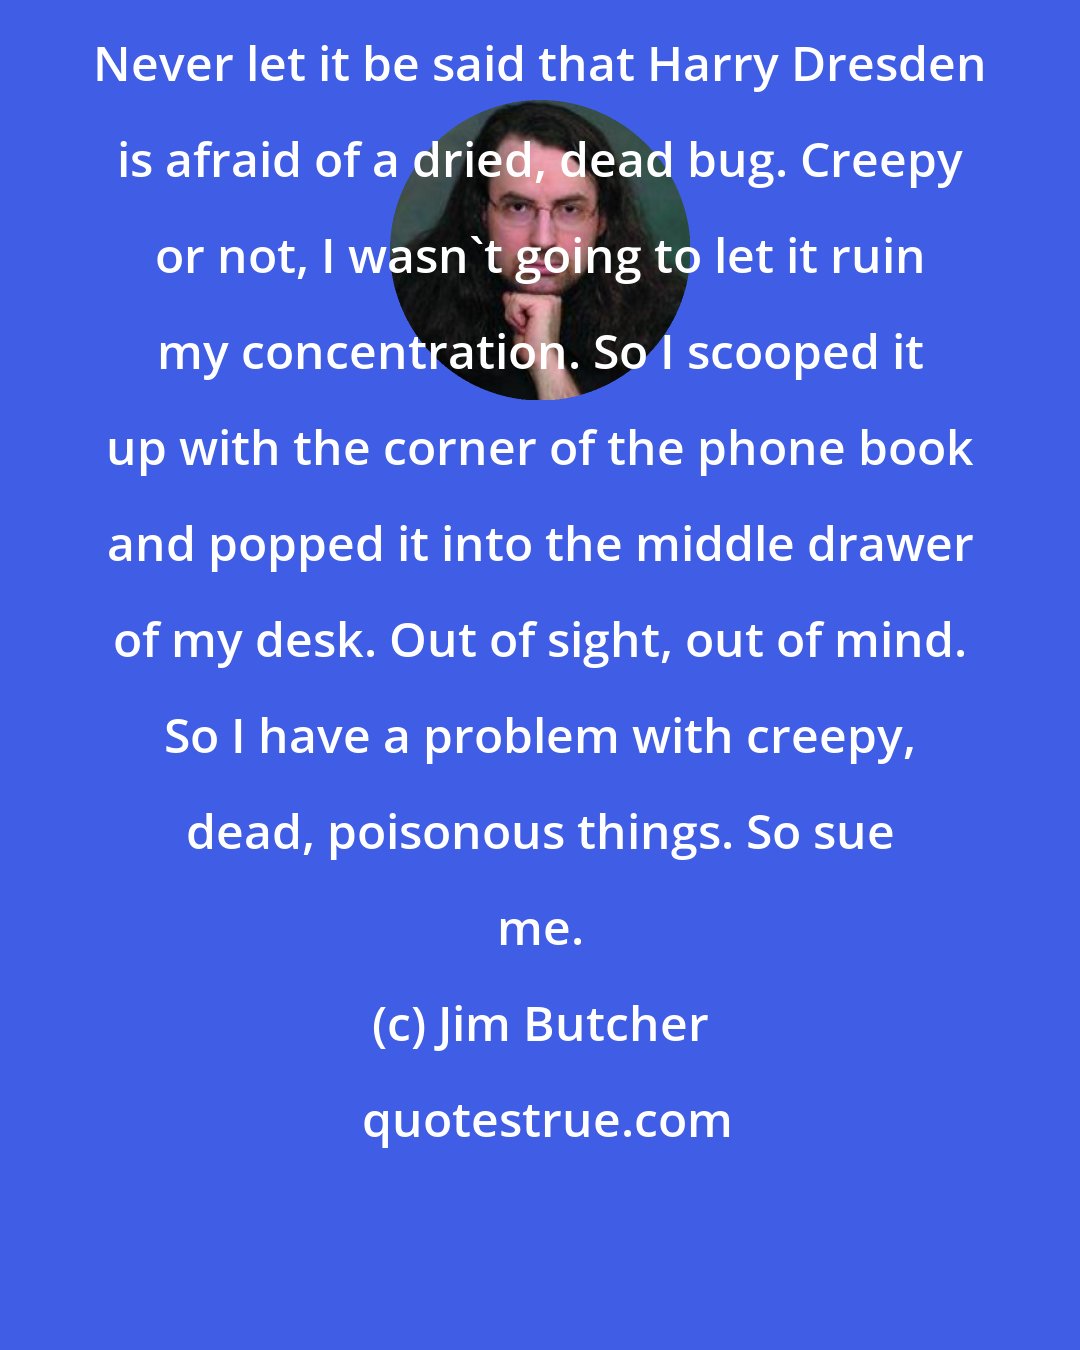 Jim Butcher: Never let it be said that Harry Dresden is afraid of a dried, dead bug. Creepy or not, I wasn't going to let it ruin my concentration. So I scooped it up with the corner of the phone book and popped it into the middle drawer of my desk. Out of sight, out of mind. So I have a problem with creepy, dead, poisonous things. So sue me.